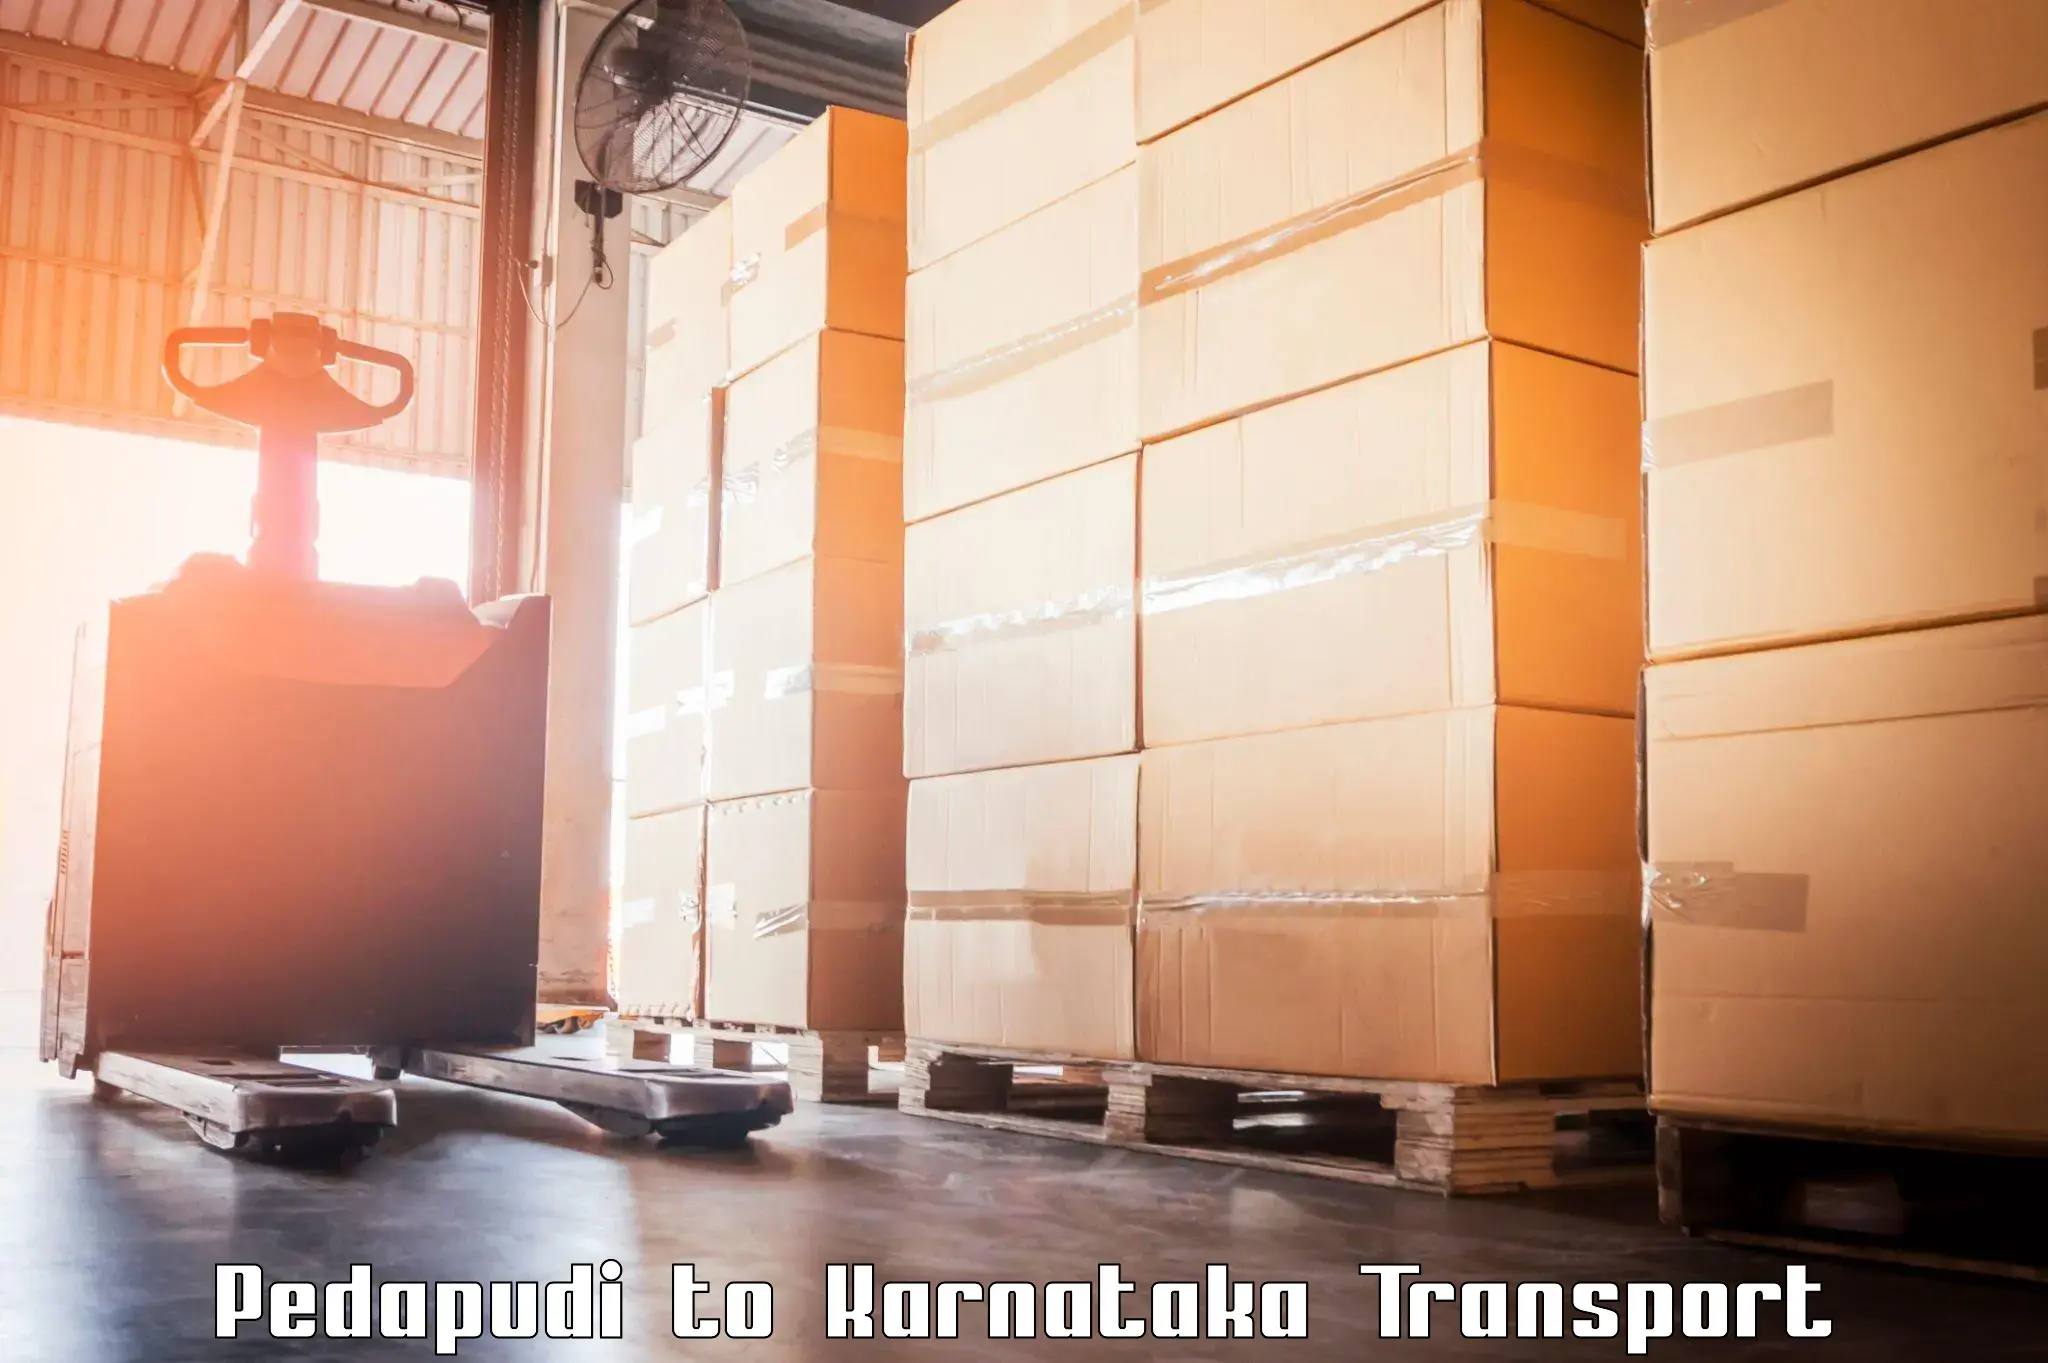 Commercial transport service Pedapudi to Harpanahalli